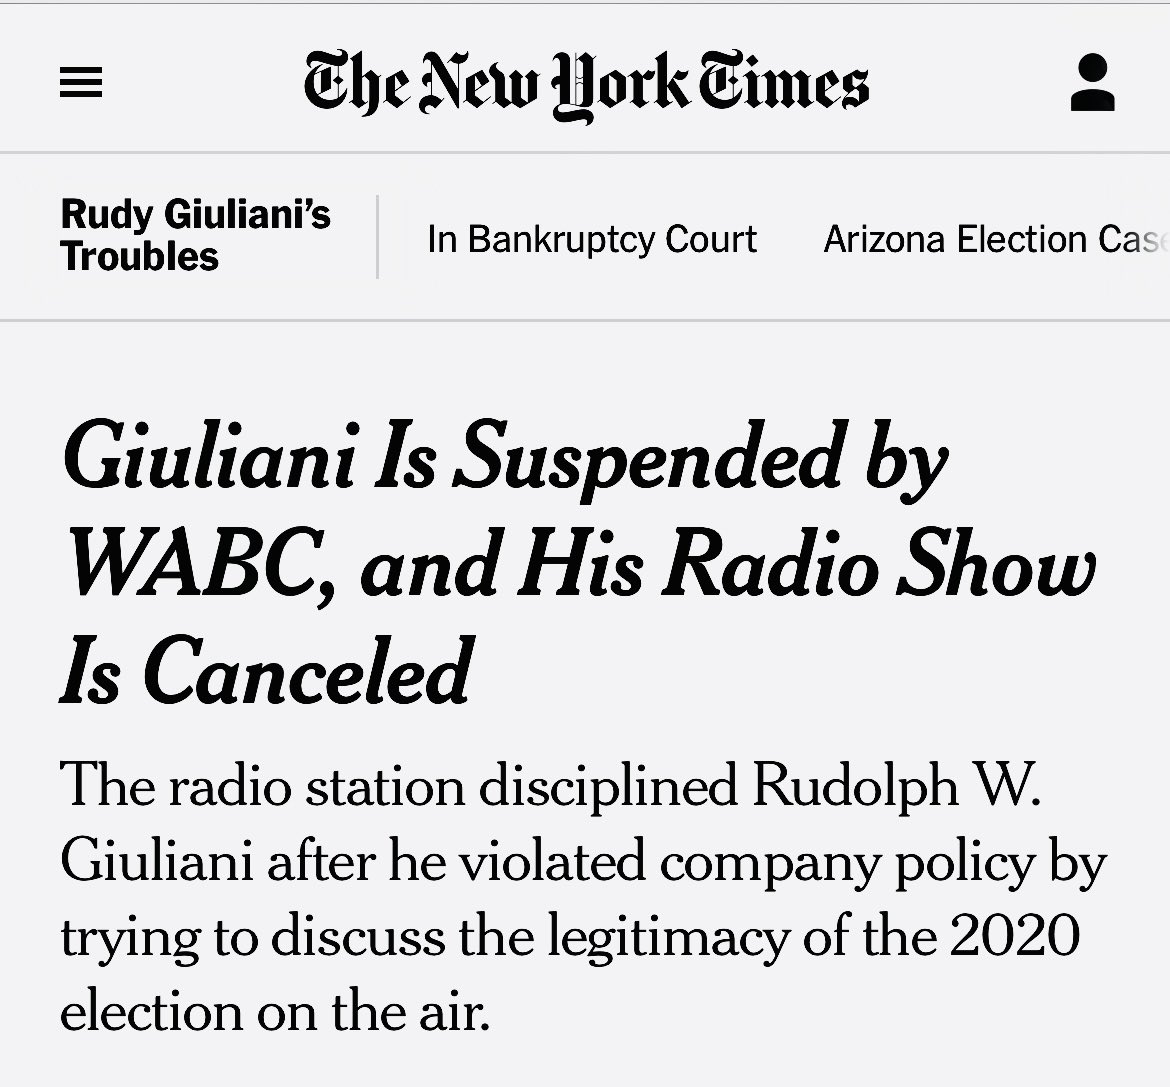 One of Rudy’s few remaining income streams just got turned off.